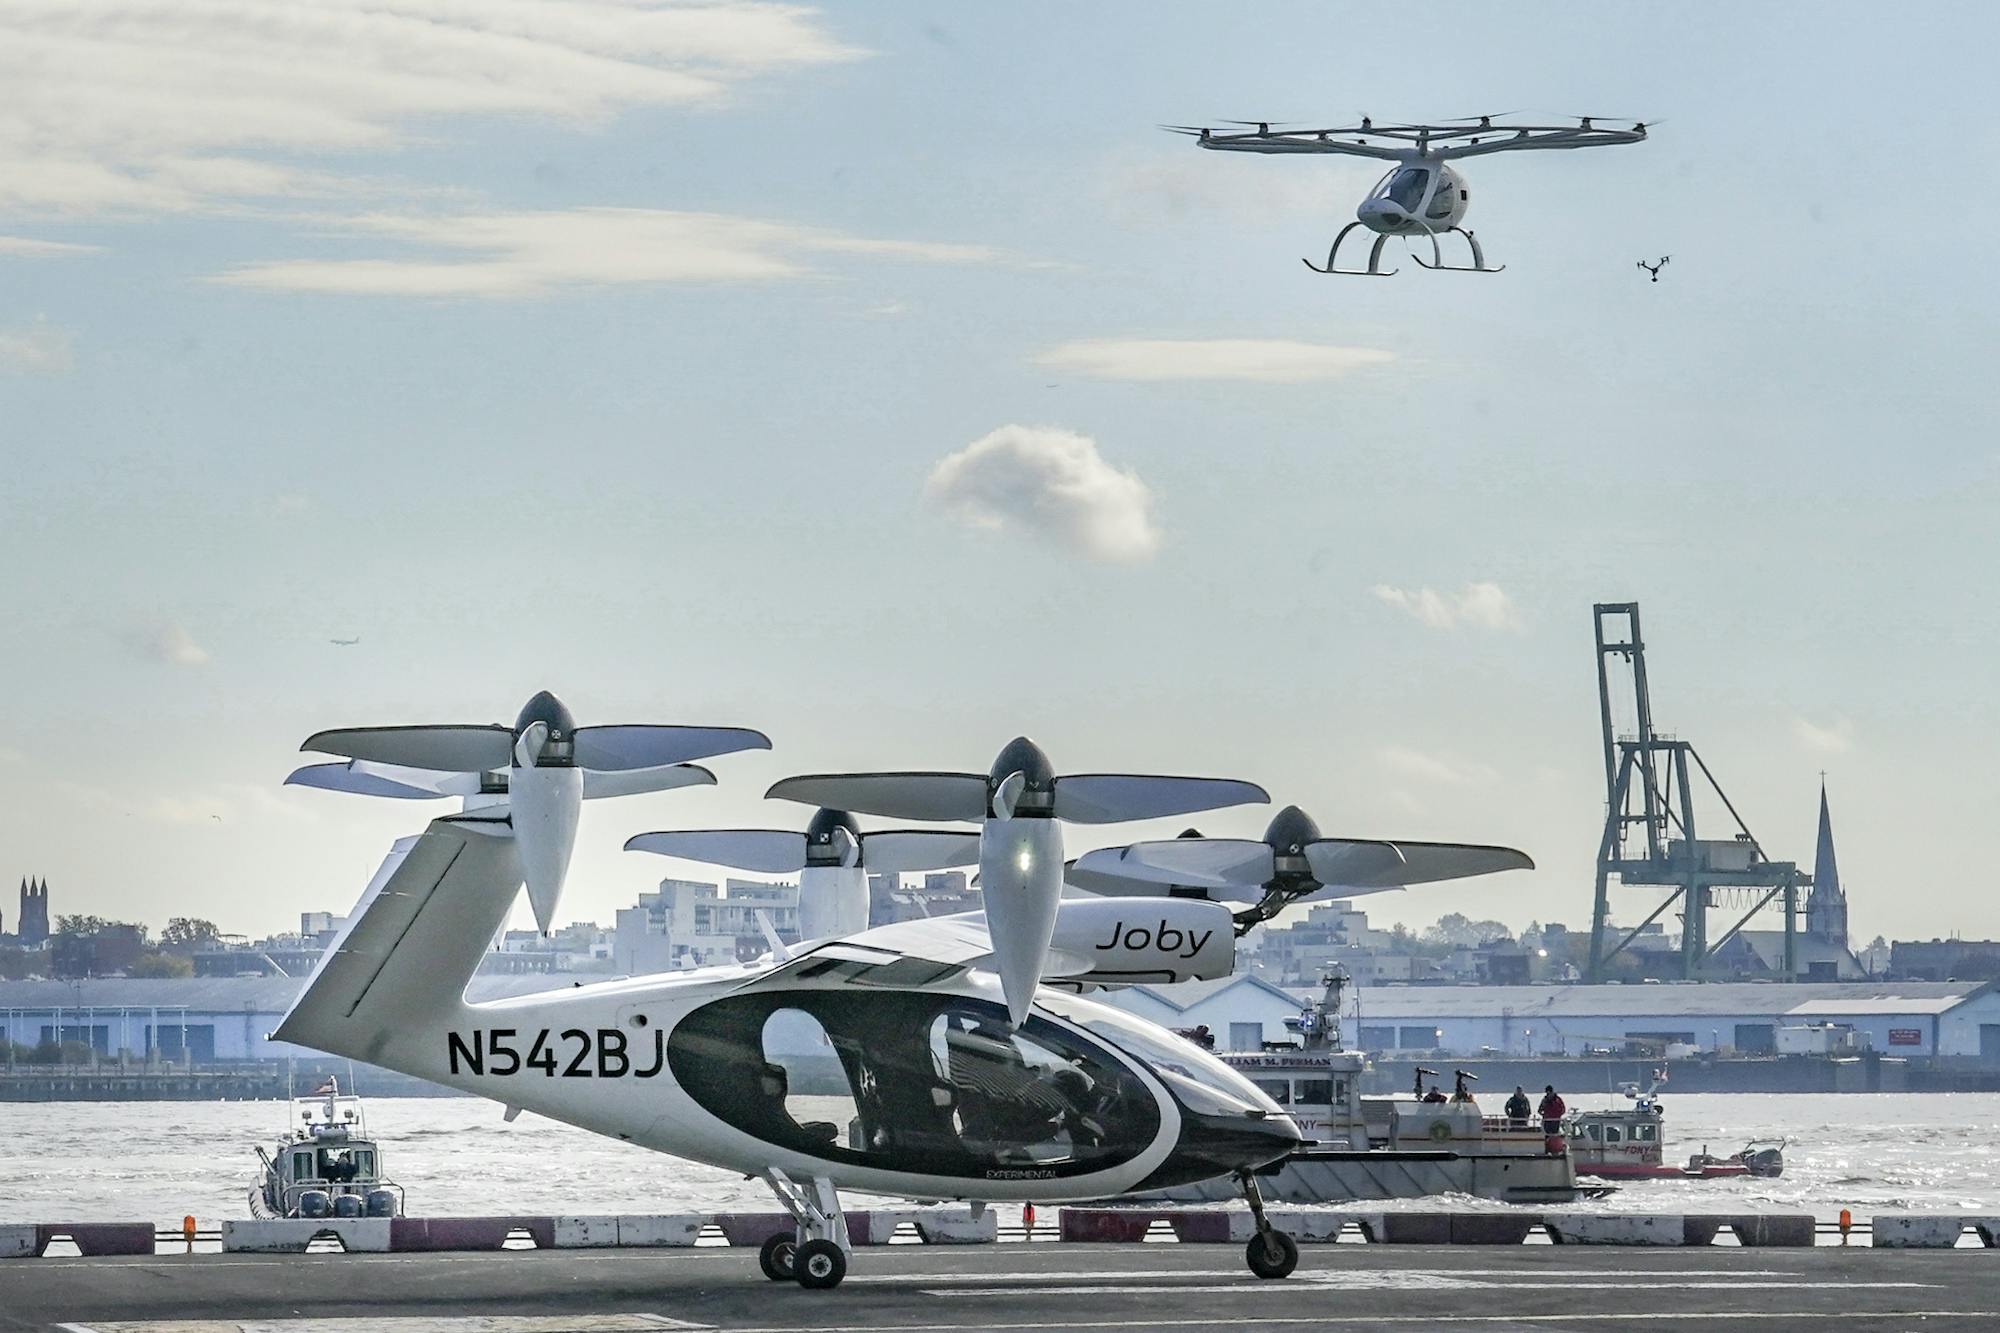 electric air taxis are on the way – quiet evtols may be flying passengers as early as 2025